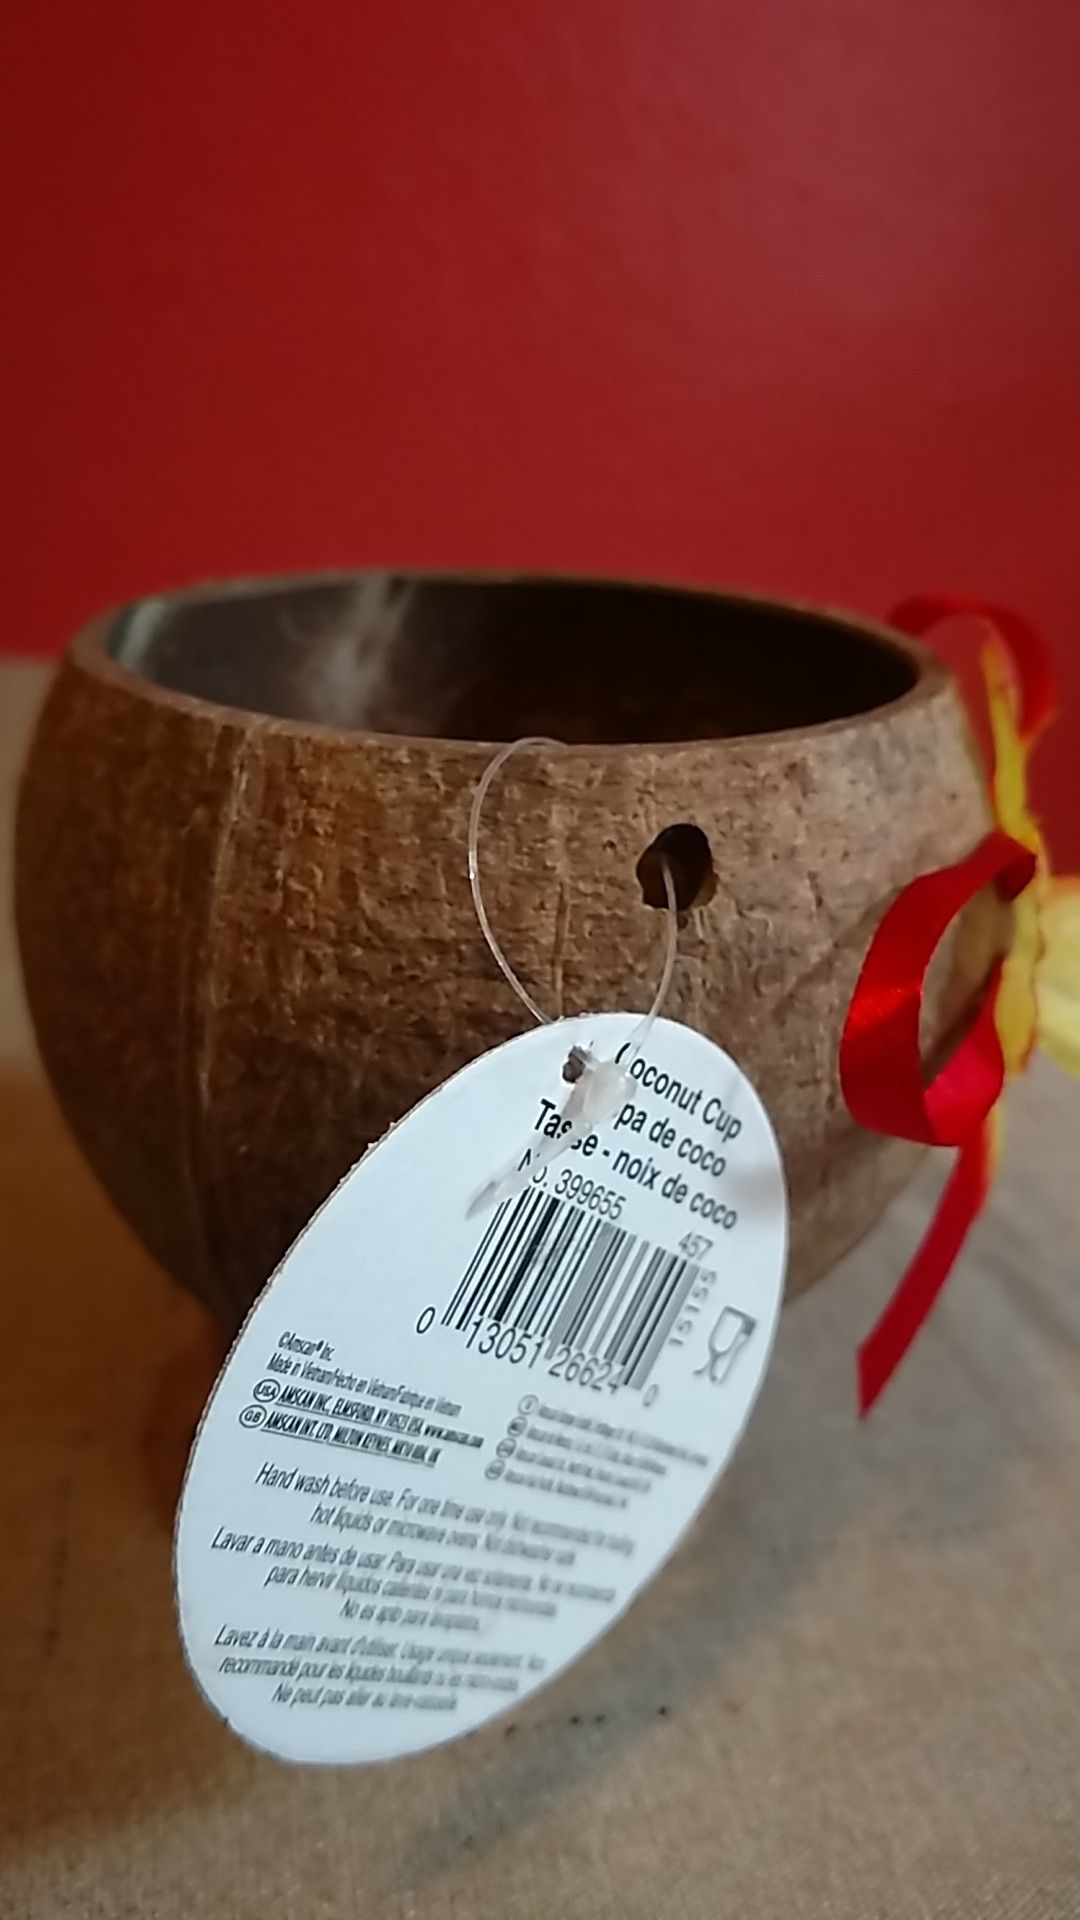 Brand new coconut cup with flower